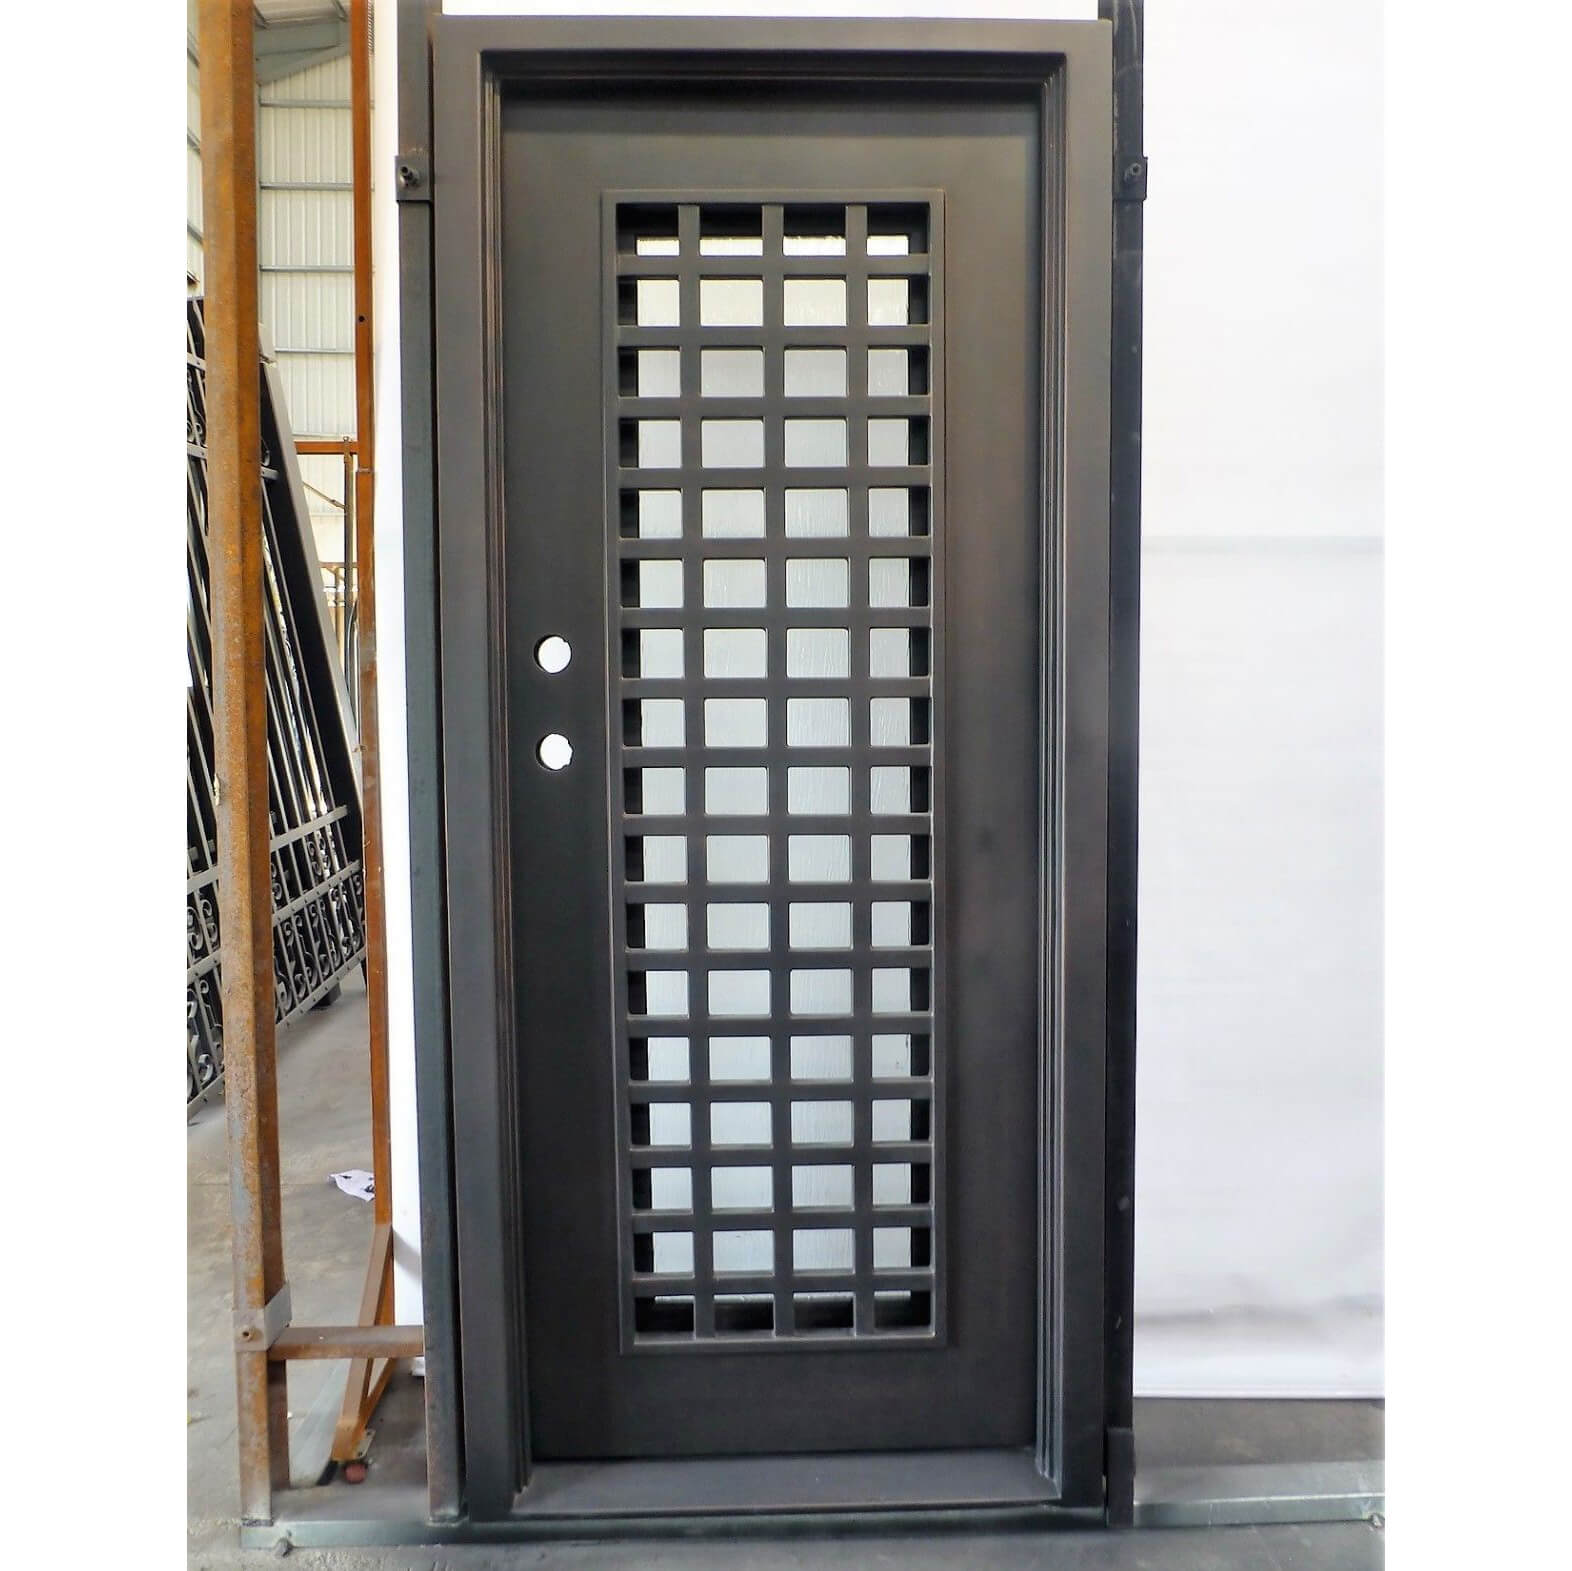 GID thermal break checked pattern glass design iron single door with square top